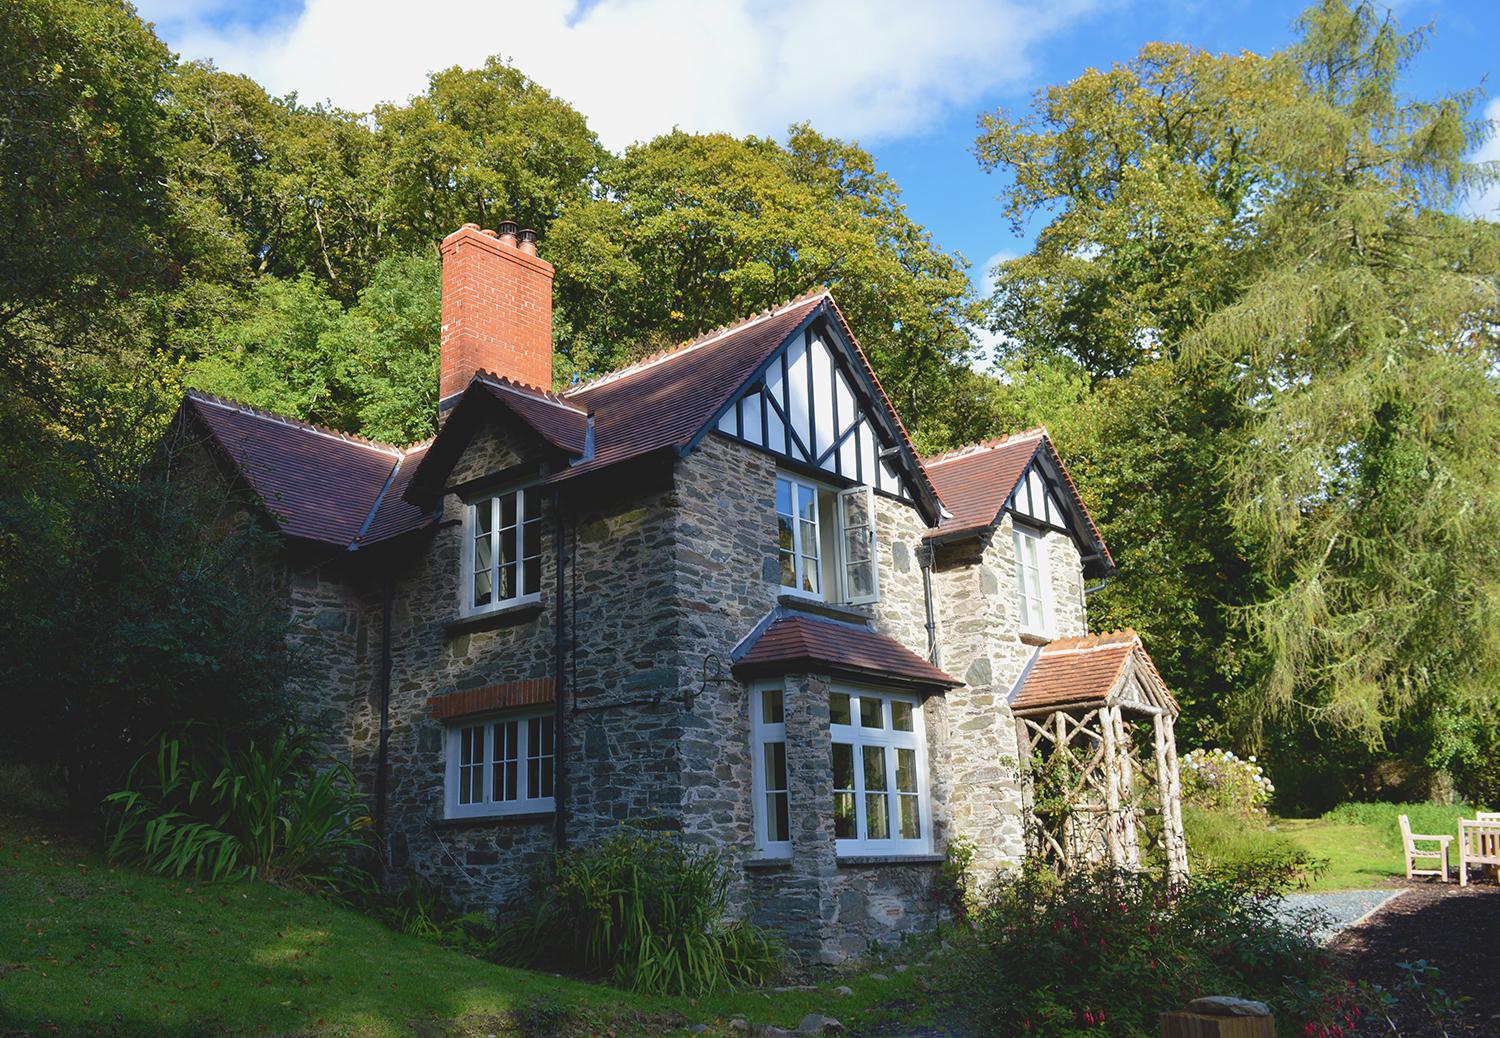 Places to stay: National Trust’s Combe Park Lodge, Devon